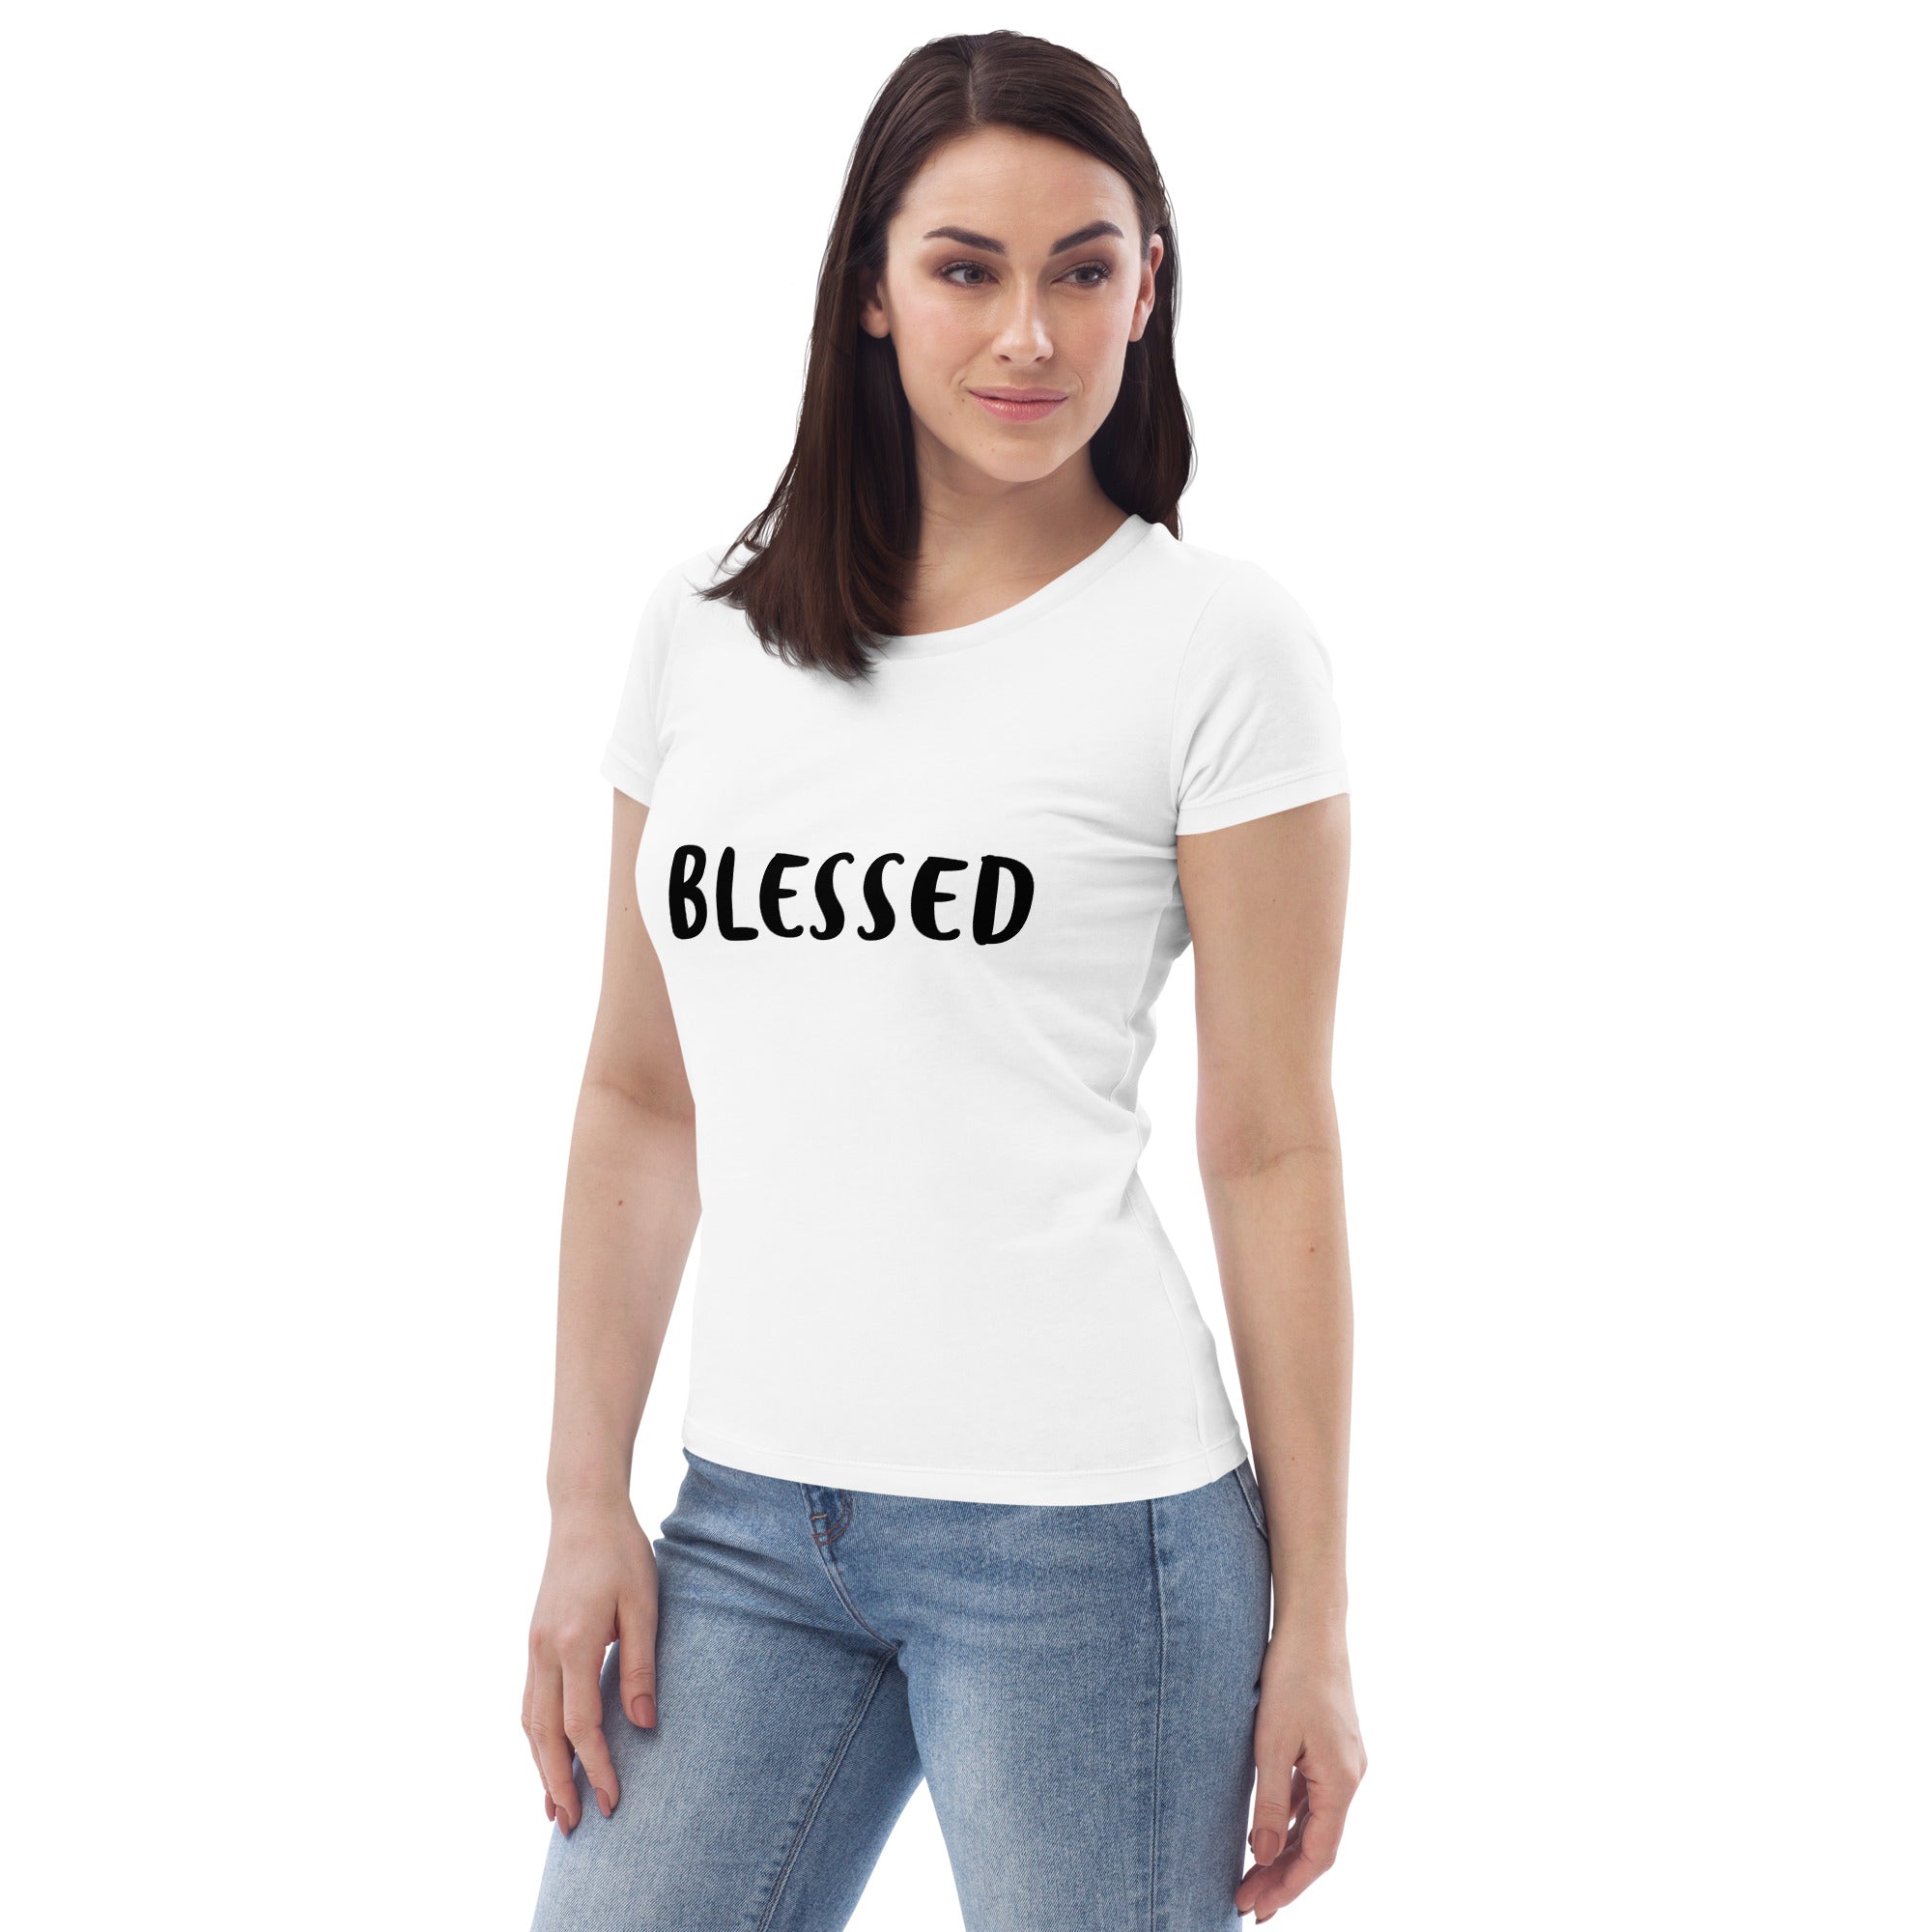 BLESSED - Women's fitted tee